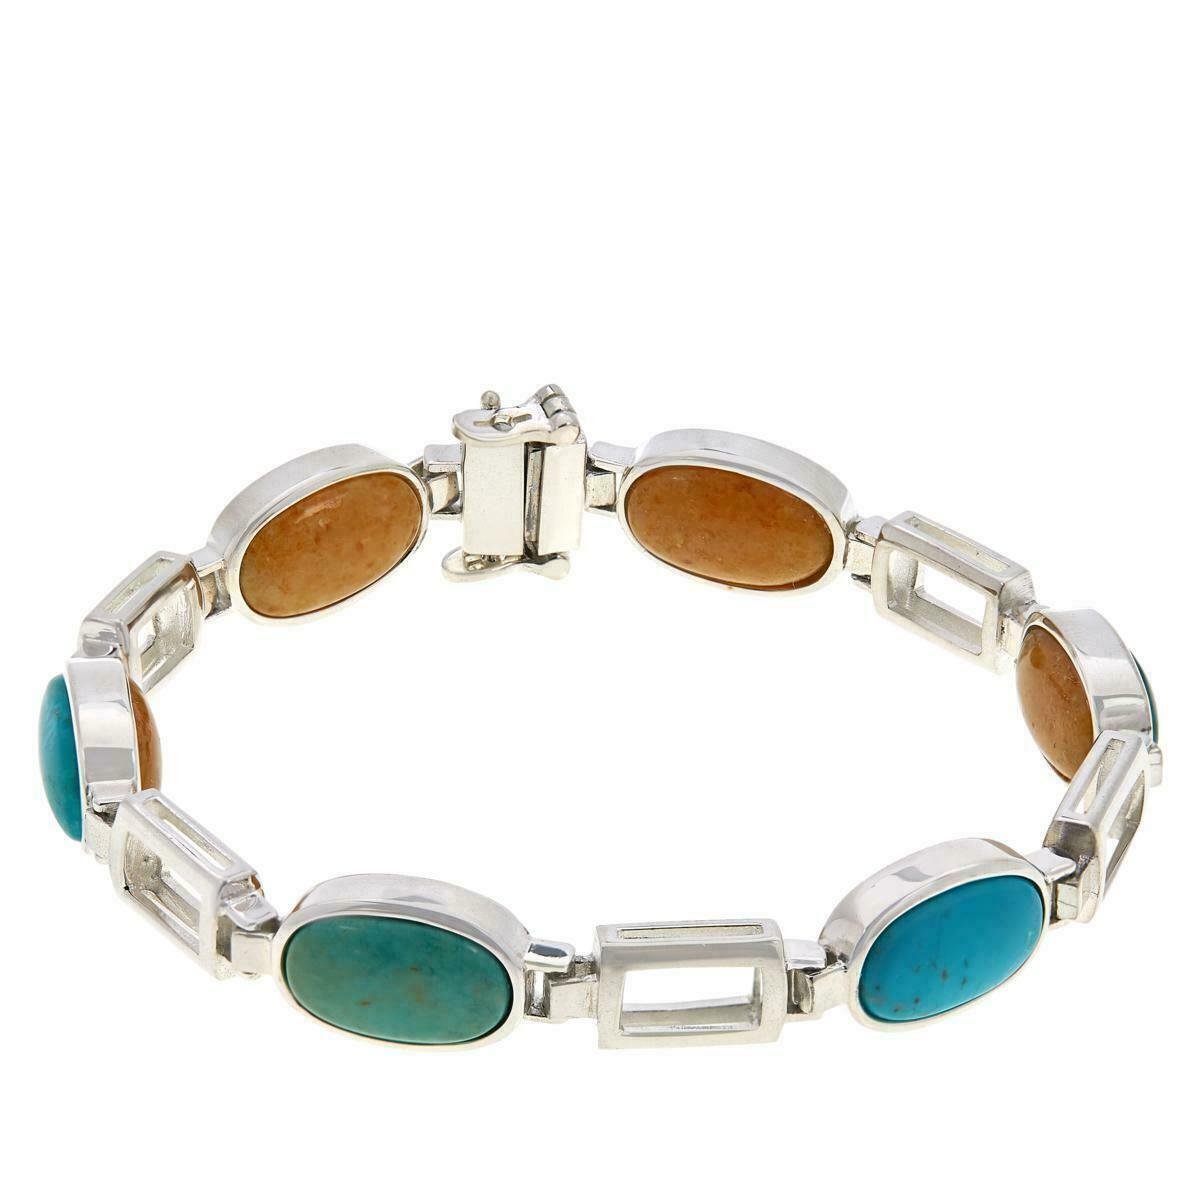 Jay King Turquoise and Butterscotch Amber Reversible Link 7-1/4 "L Bracelet $200